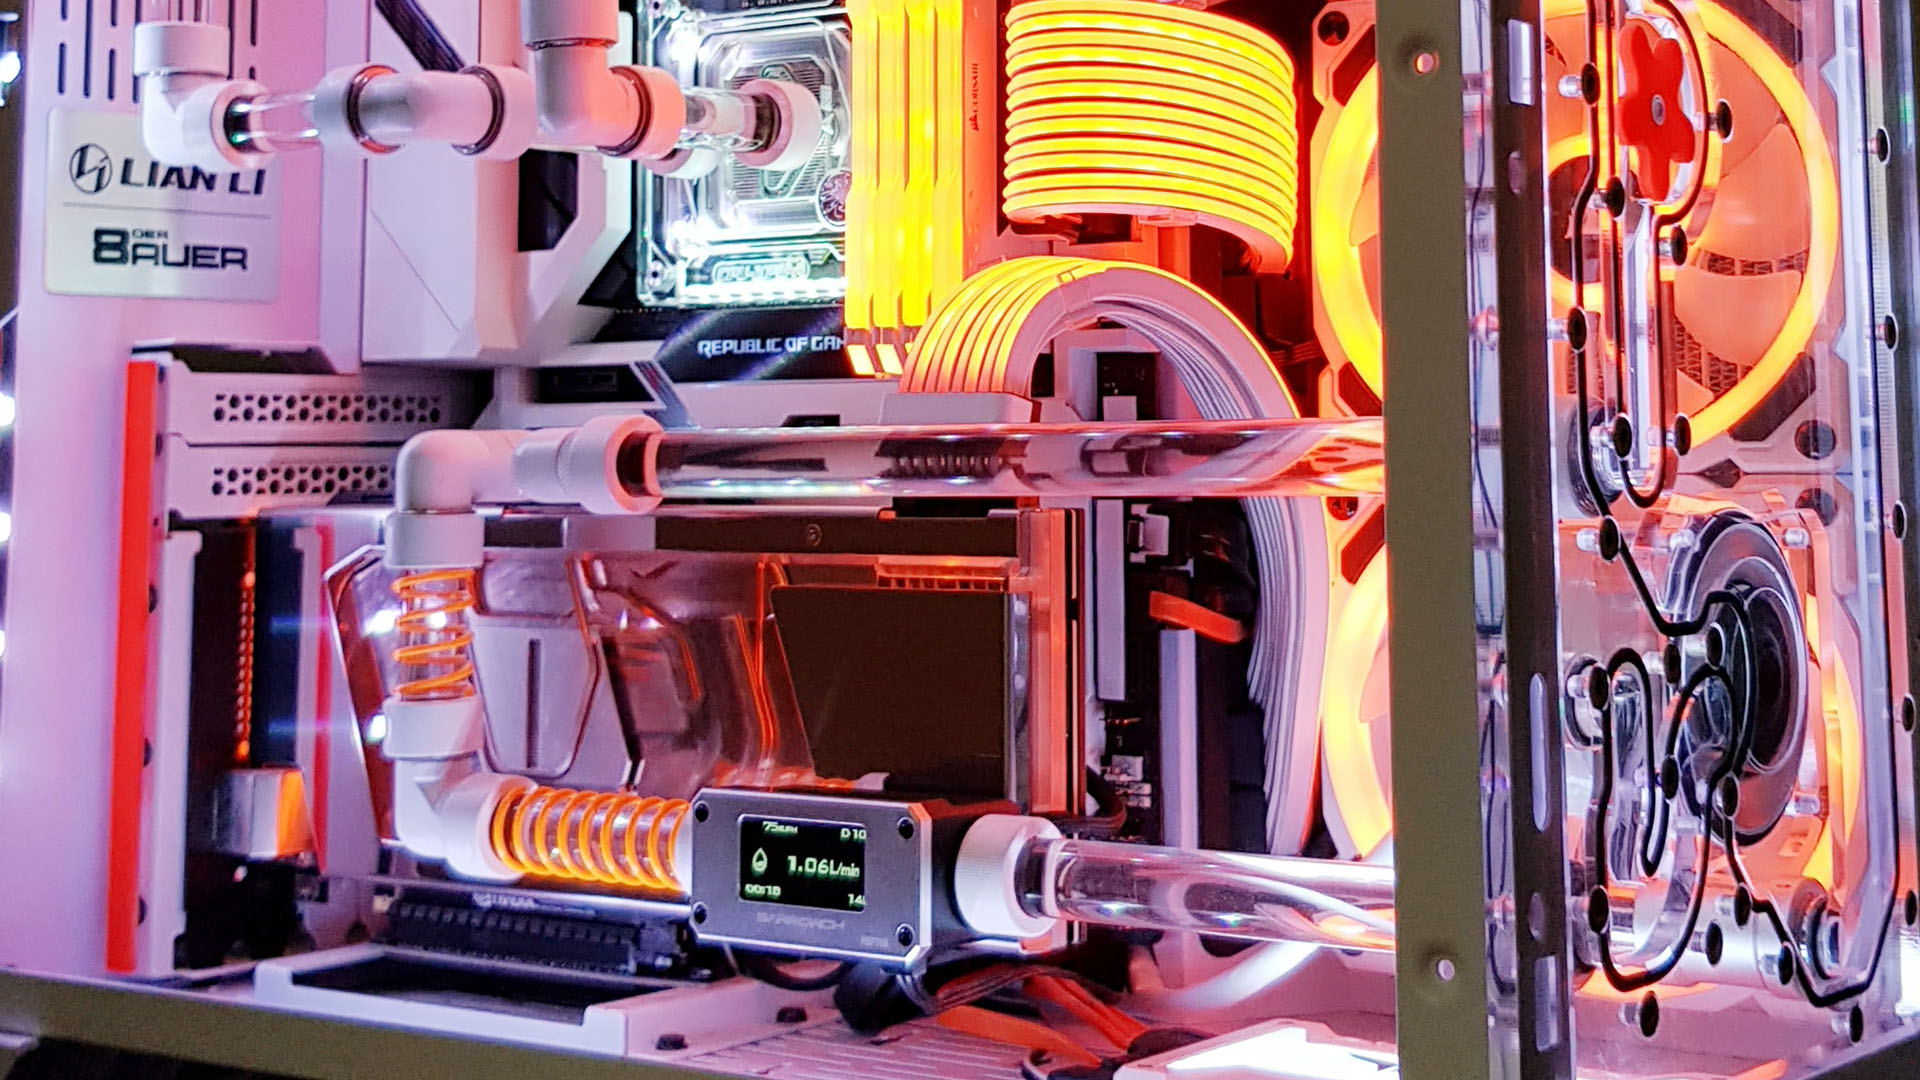 A monitoring tool is added to the custom loop in this Star Wars gaming PC